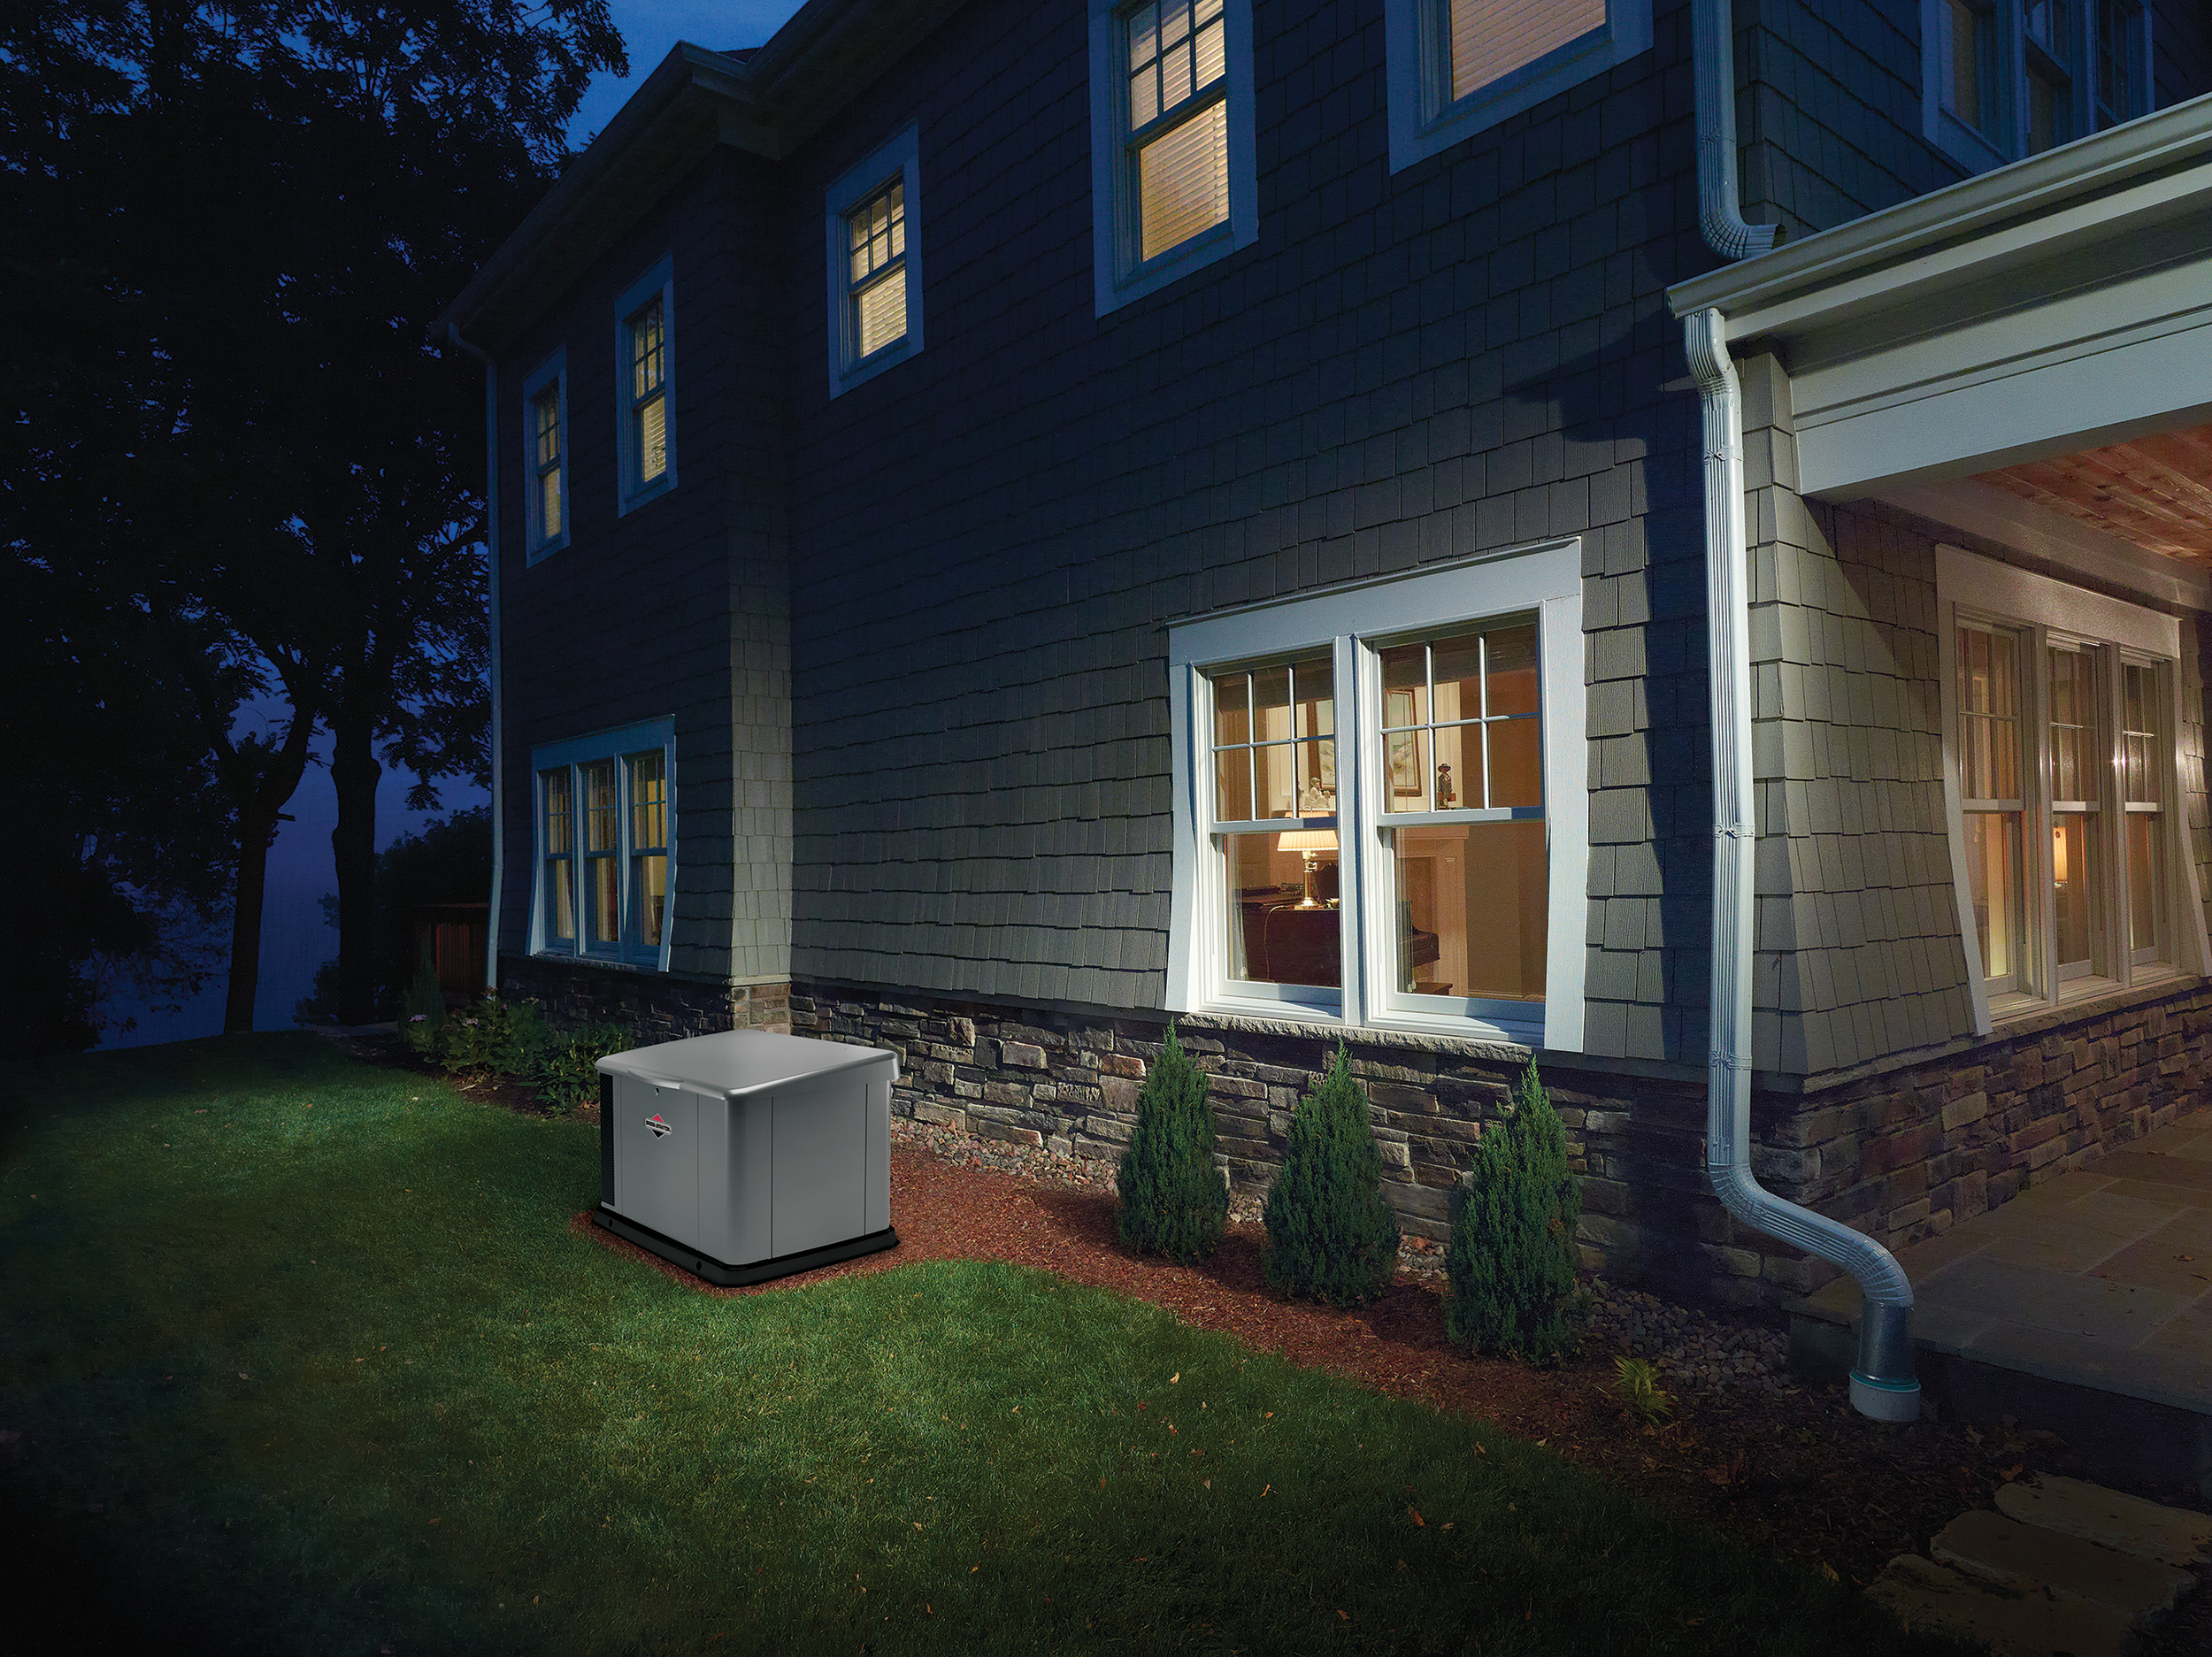 You can’t control weather-related power outages but you can keep the lights on and appliances running with a standby generator.